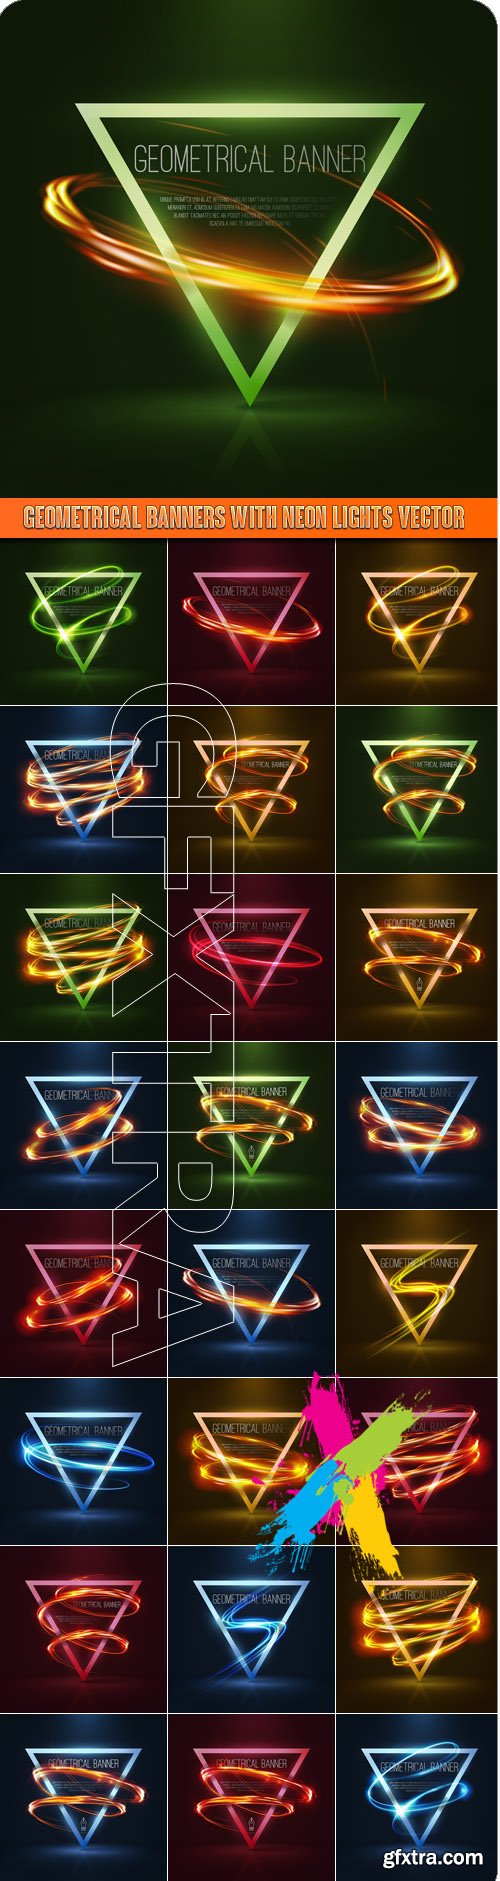 Geometrical banners with neon lights vector